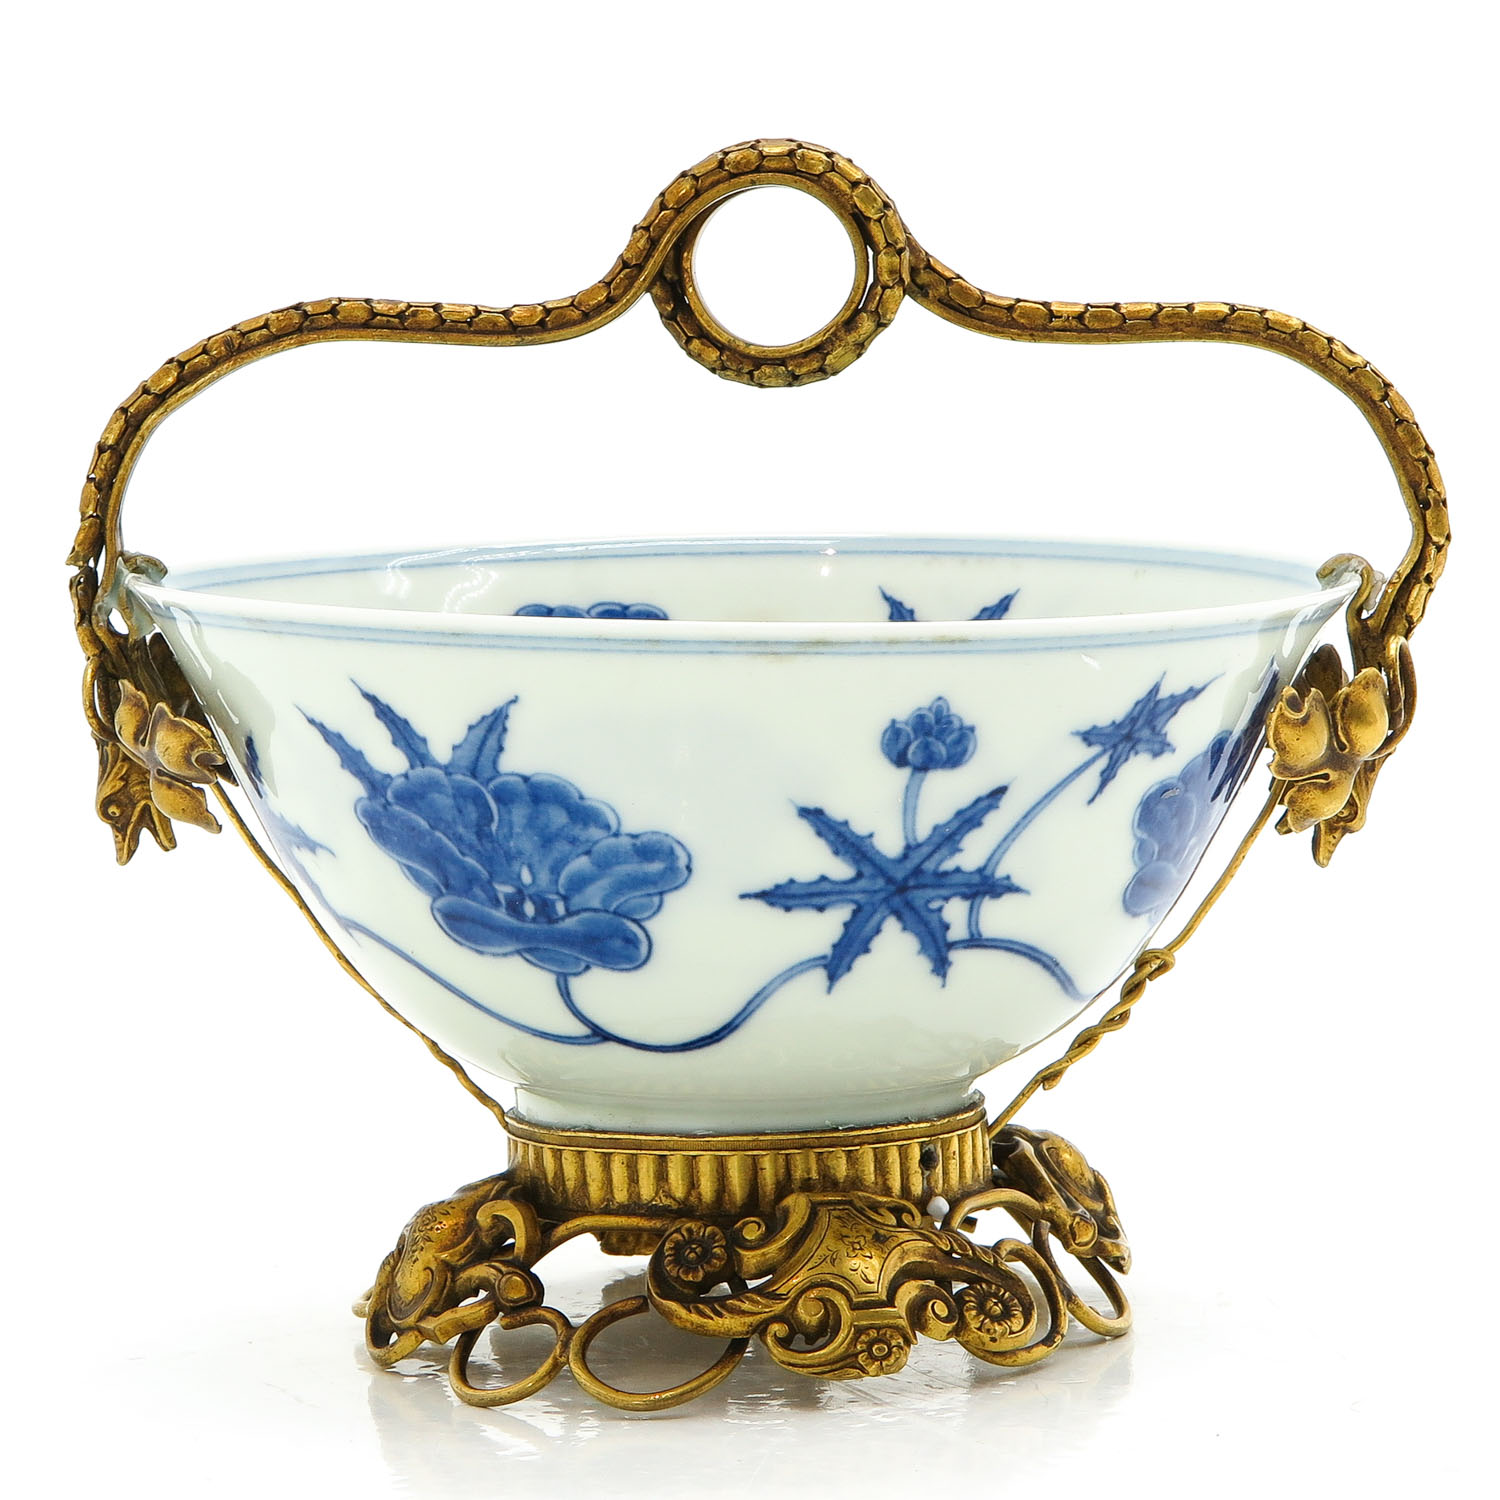 A Blue and White Serving Bowl